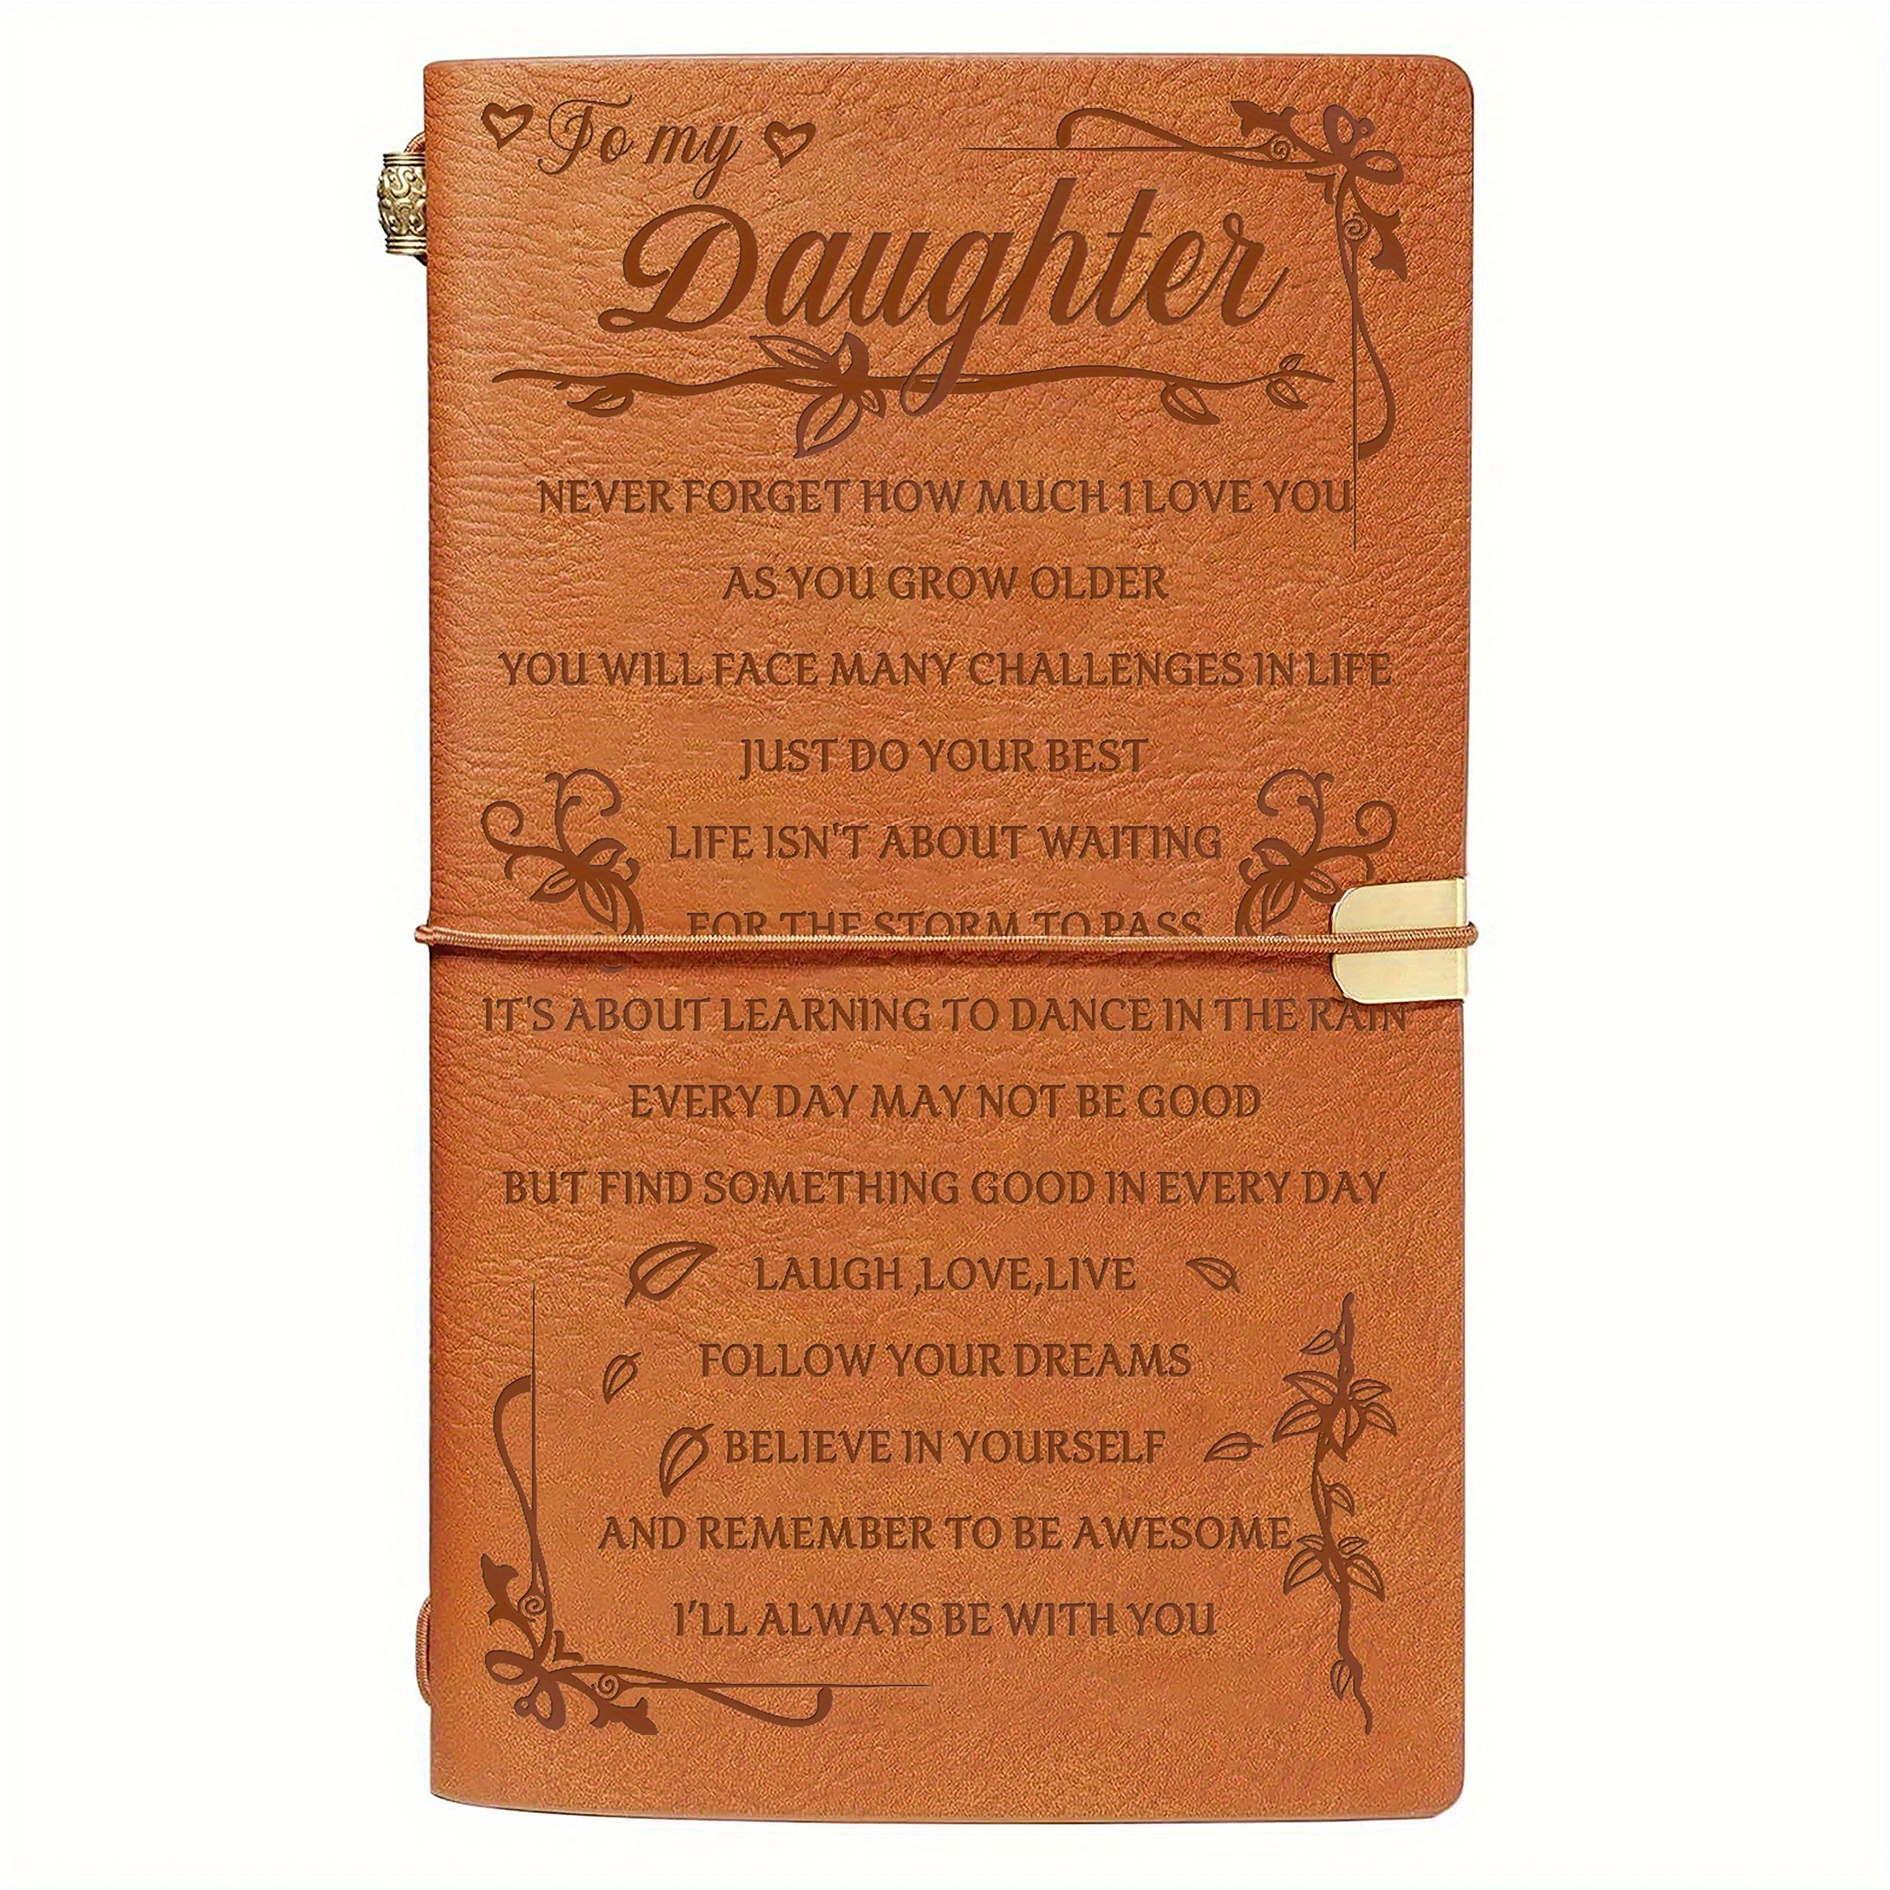 Dad Leftover Parts is Proof You Made it Even Better - Creative Notebook, To  Do & Doodles: A Beautiful Notebook Gift - Featuring Notes, Focus, To Do &  Doodles: Bowers, Johnny: 9781798185698